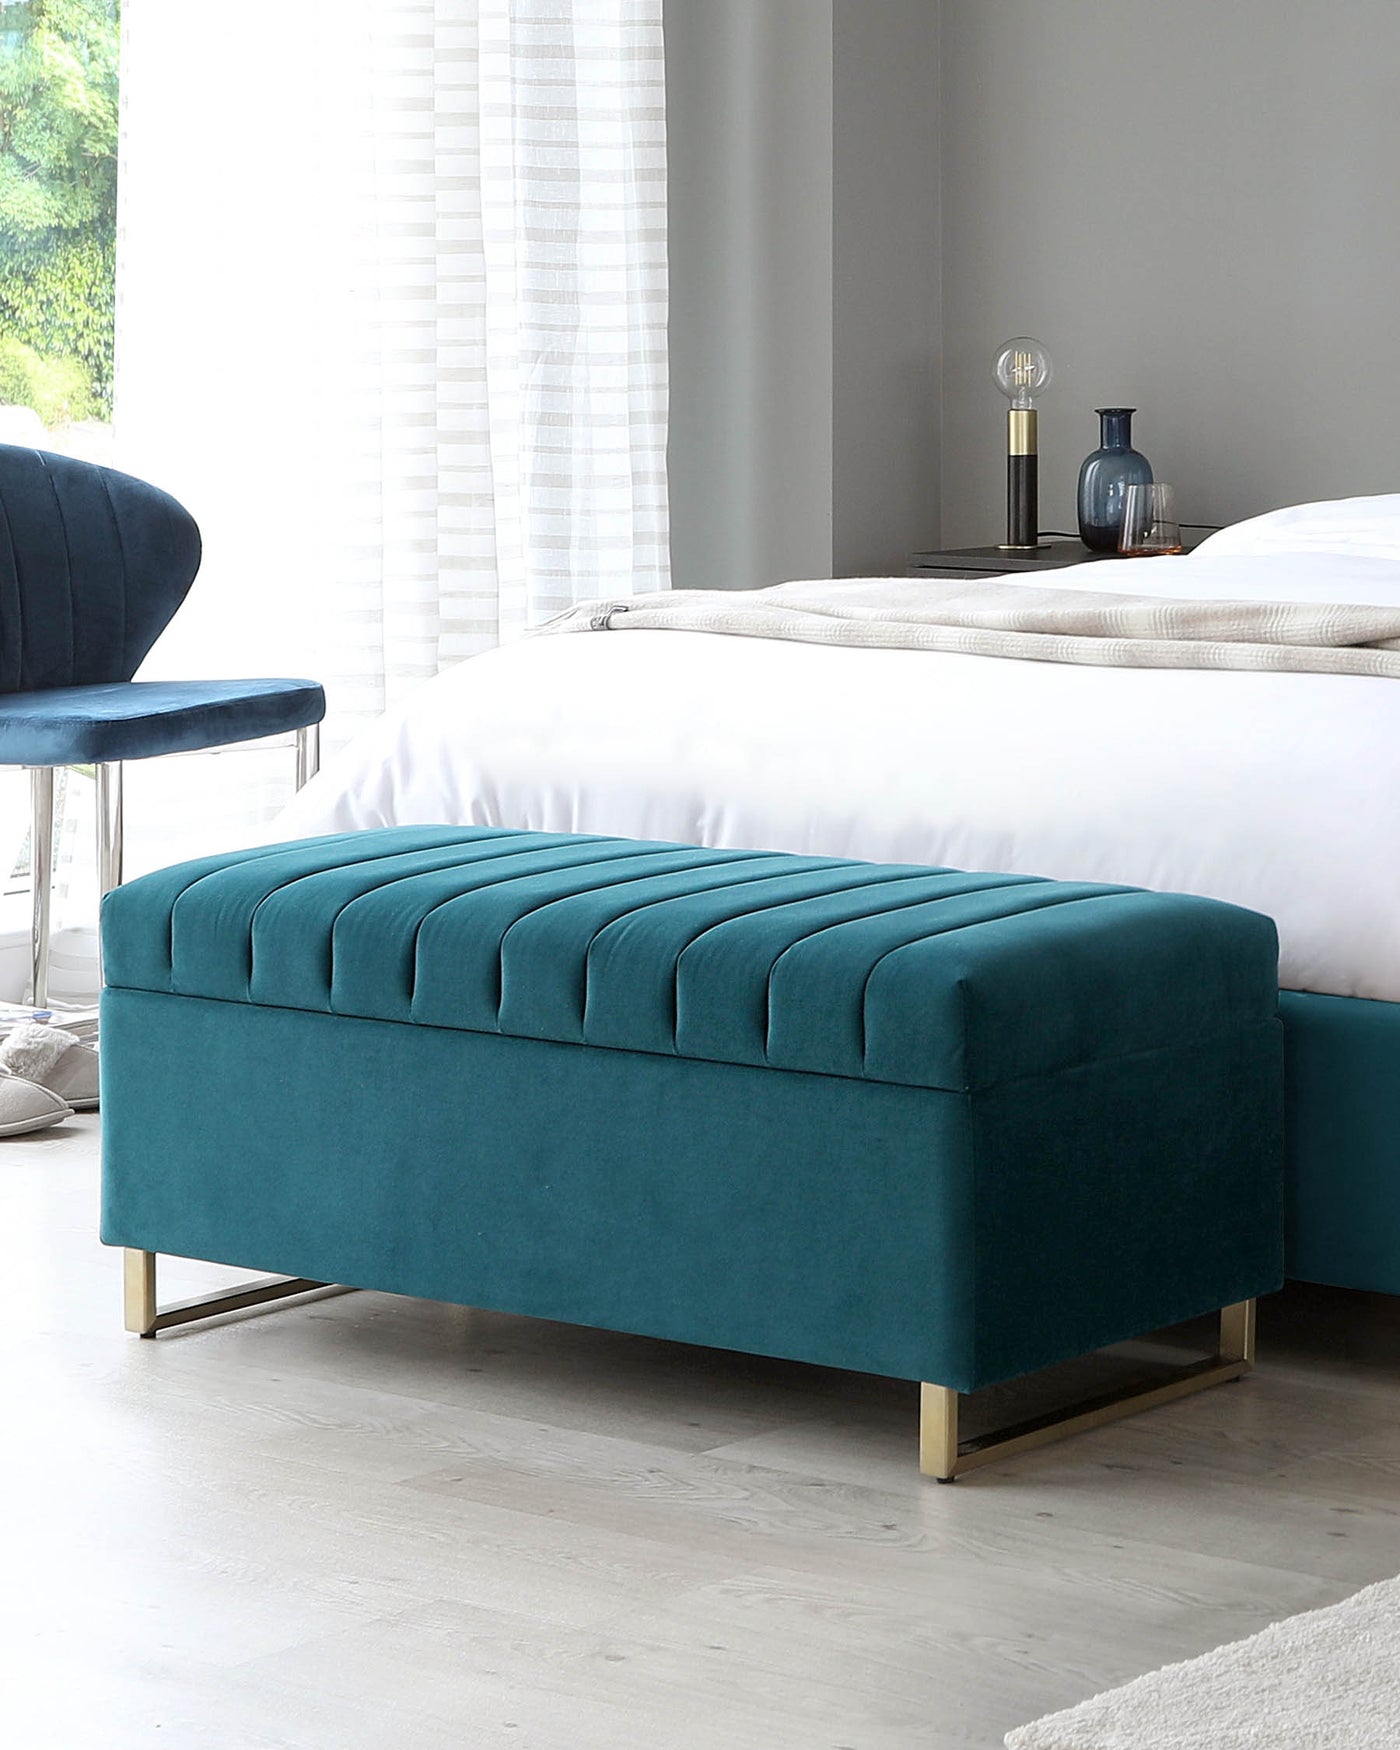 Elegant teal blue upholstered bench with plush, channel-tufted padding and sleek gold-toned metal legs at the foot of a neatly made bed; contemporary design with a luxurious appeal.